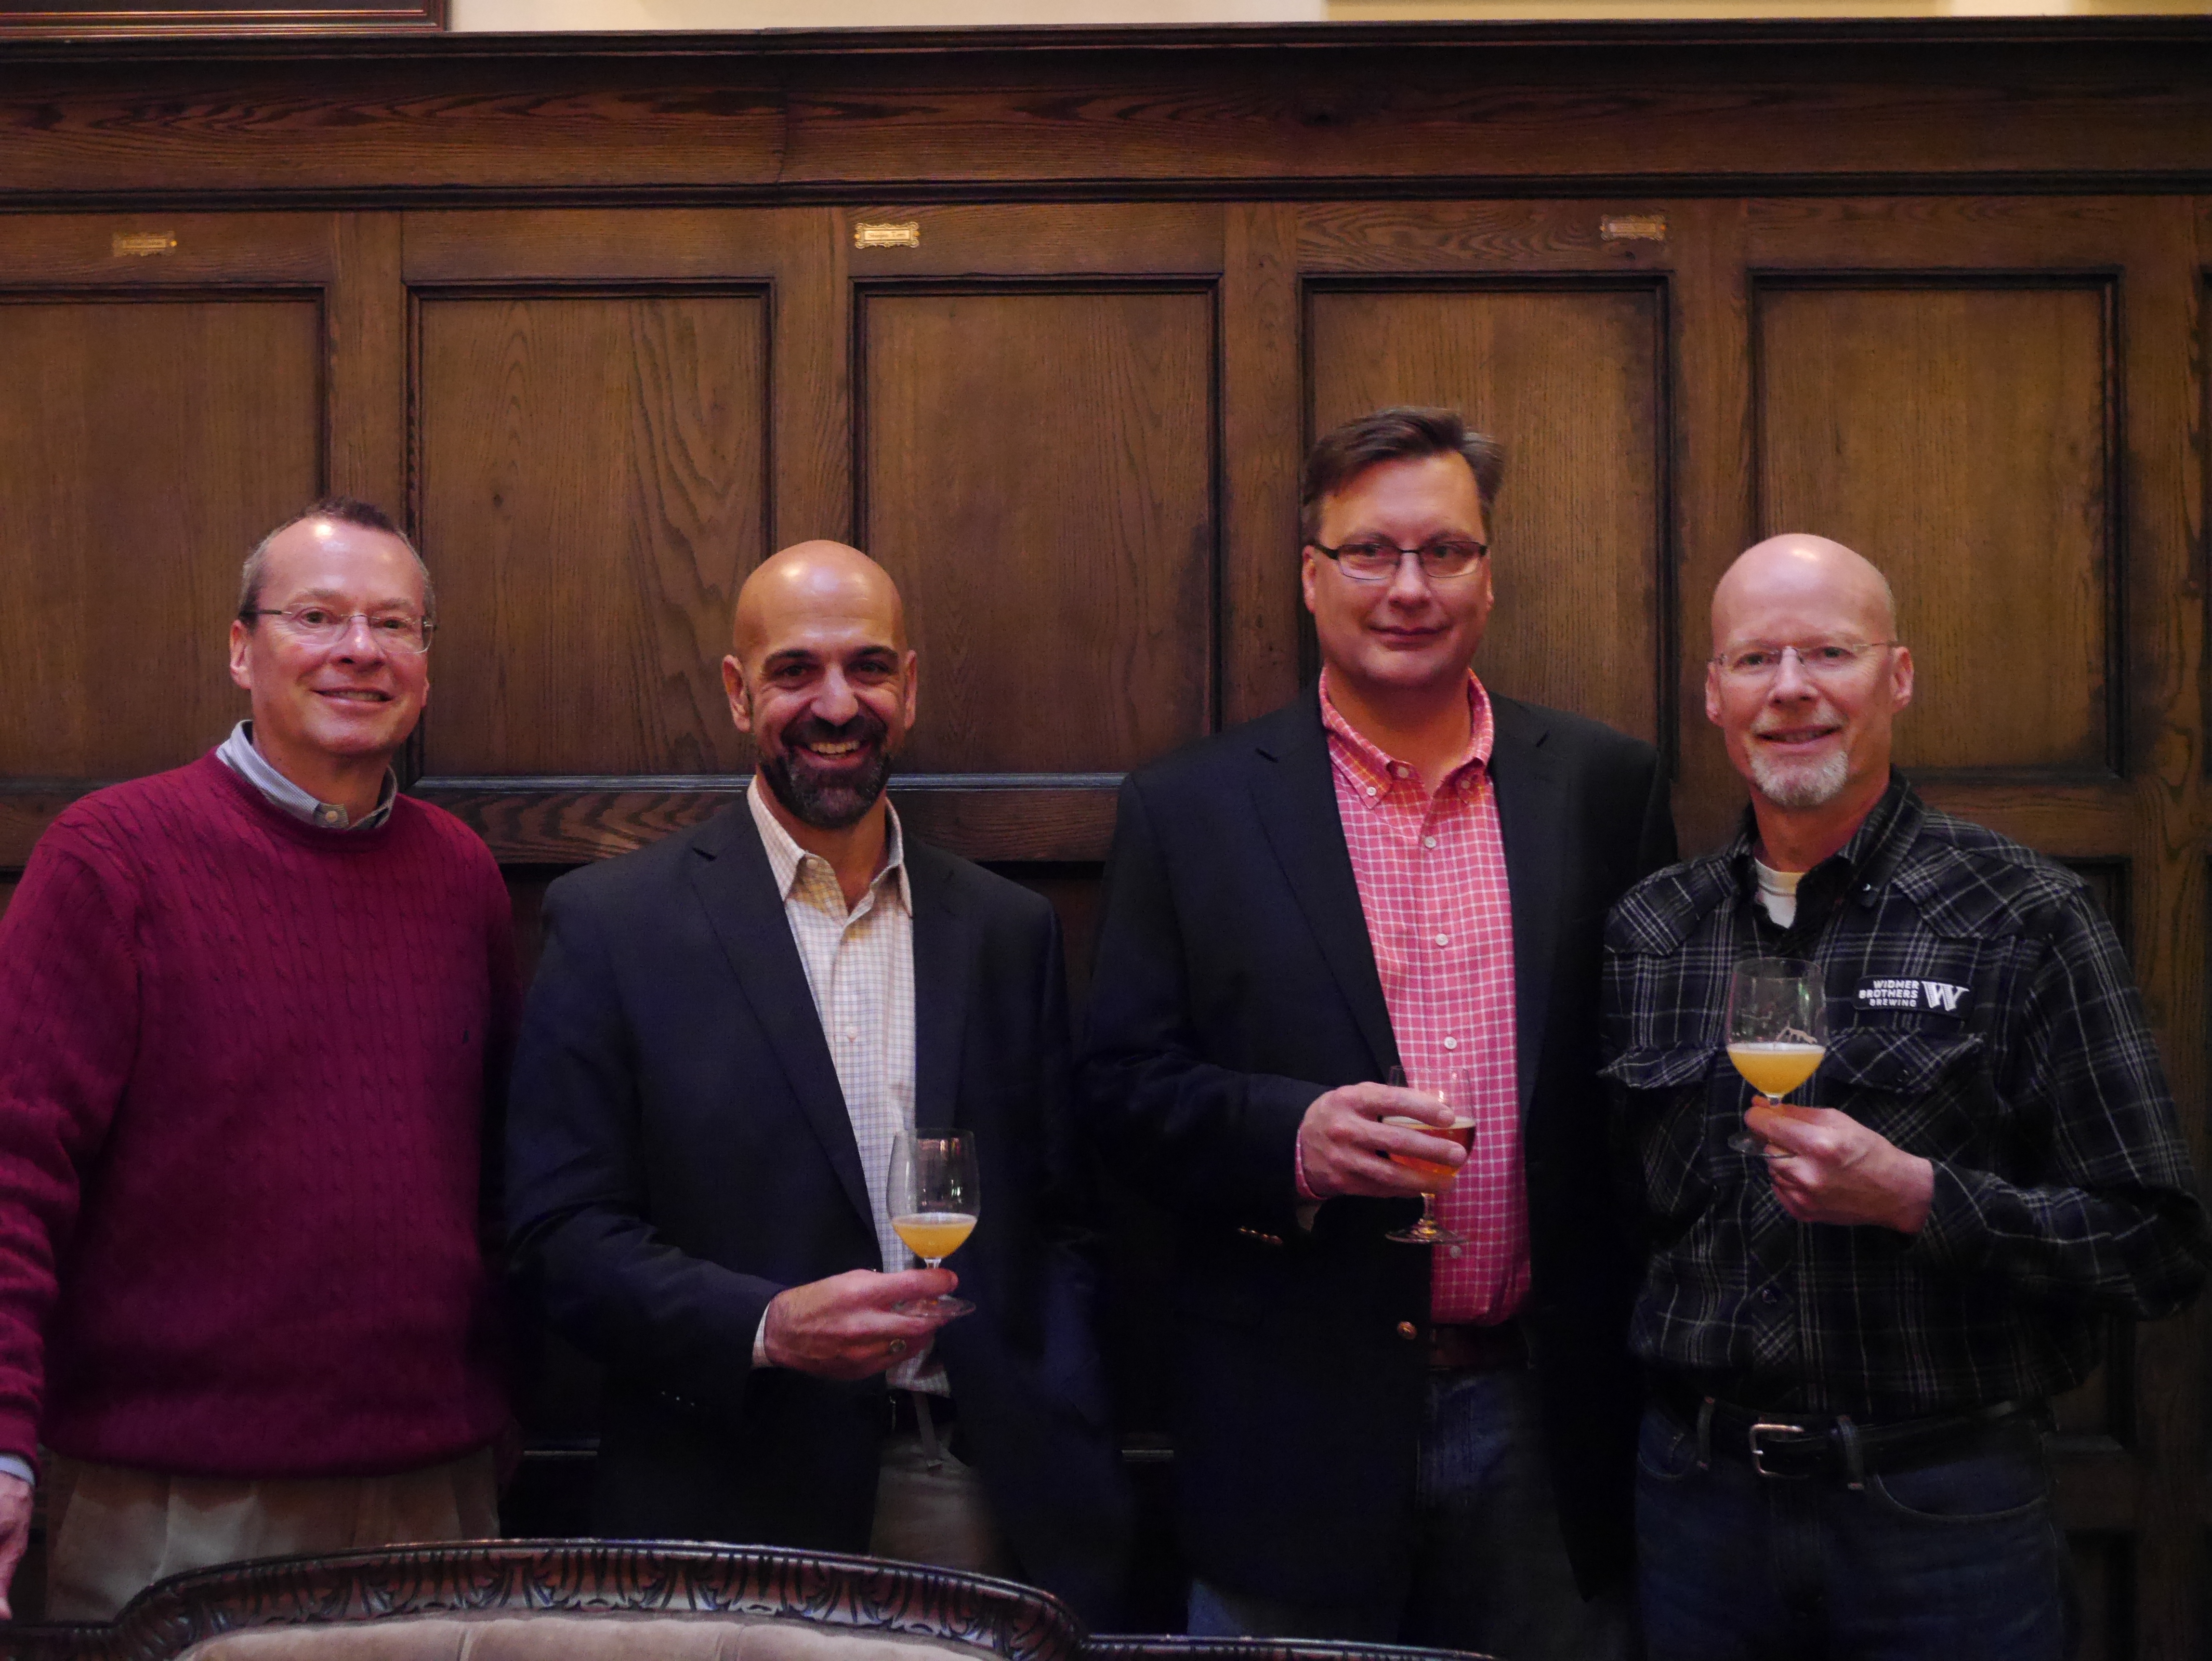 Kurt Widmer, Andy Thomas (CBA CEO), Scott Mennen (CBA COO) and Rob Widmer during the 2015 Craft Brewers Conference at the Multnomah Whiskey Library. (photo by Cat Stelzer)